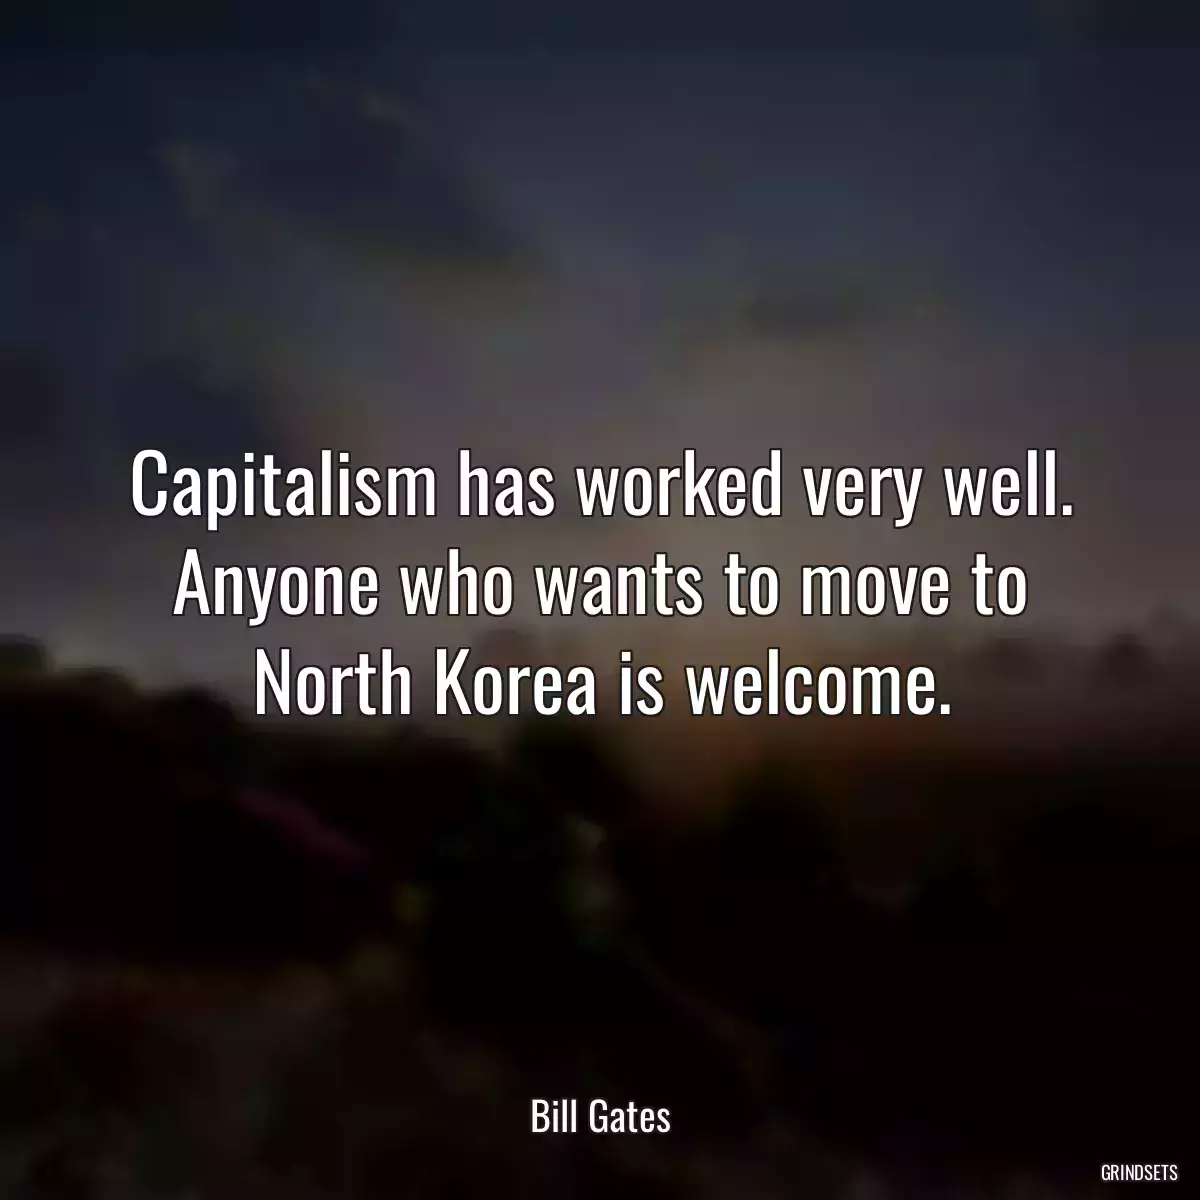 Capitalism has worked very well. Anyone who wants to move to North Korea is welcome.